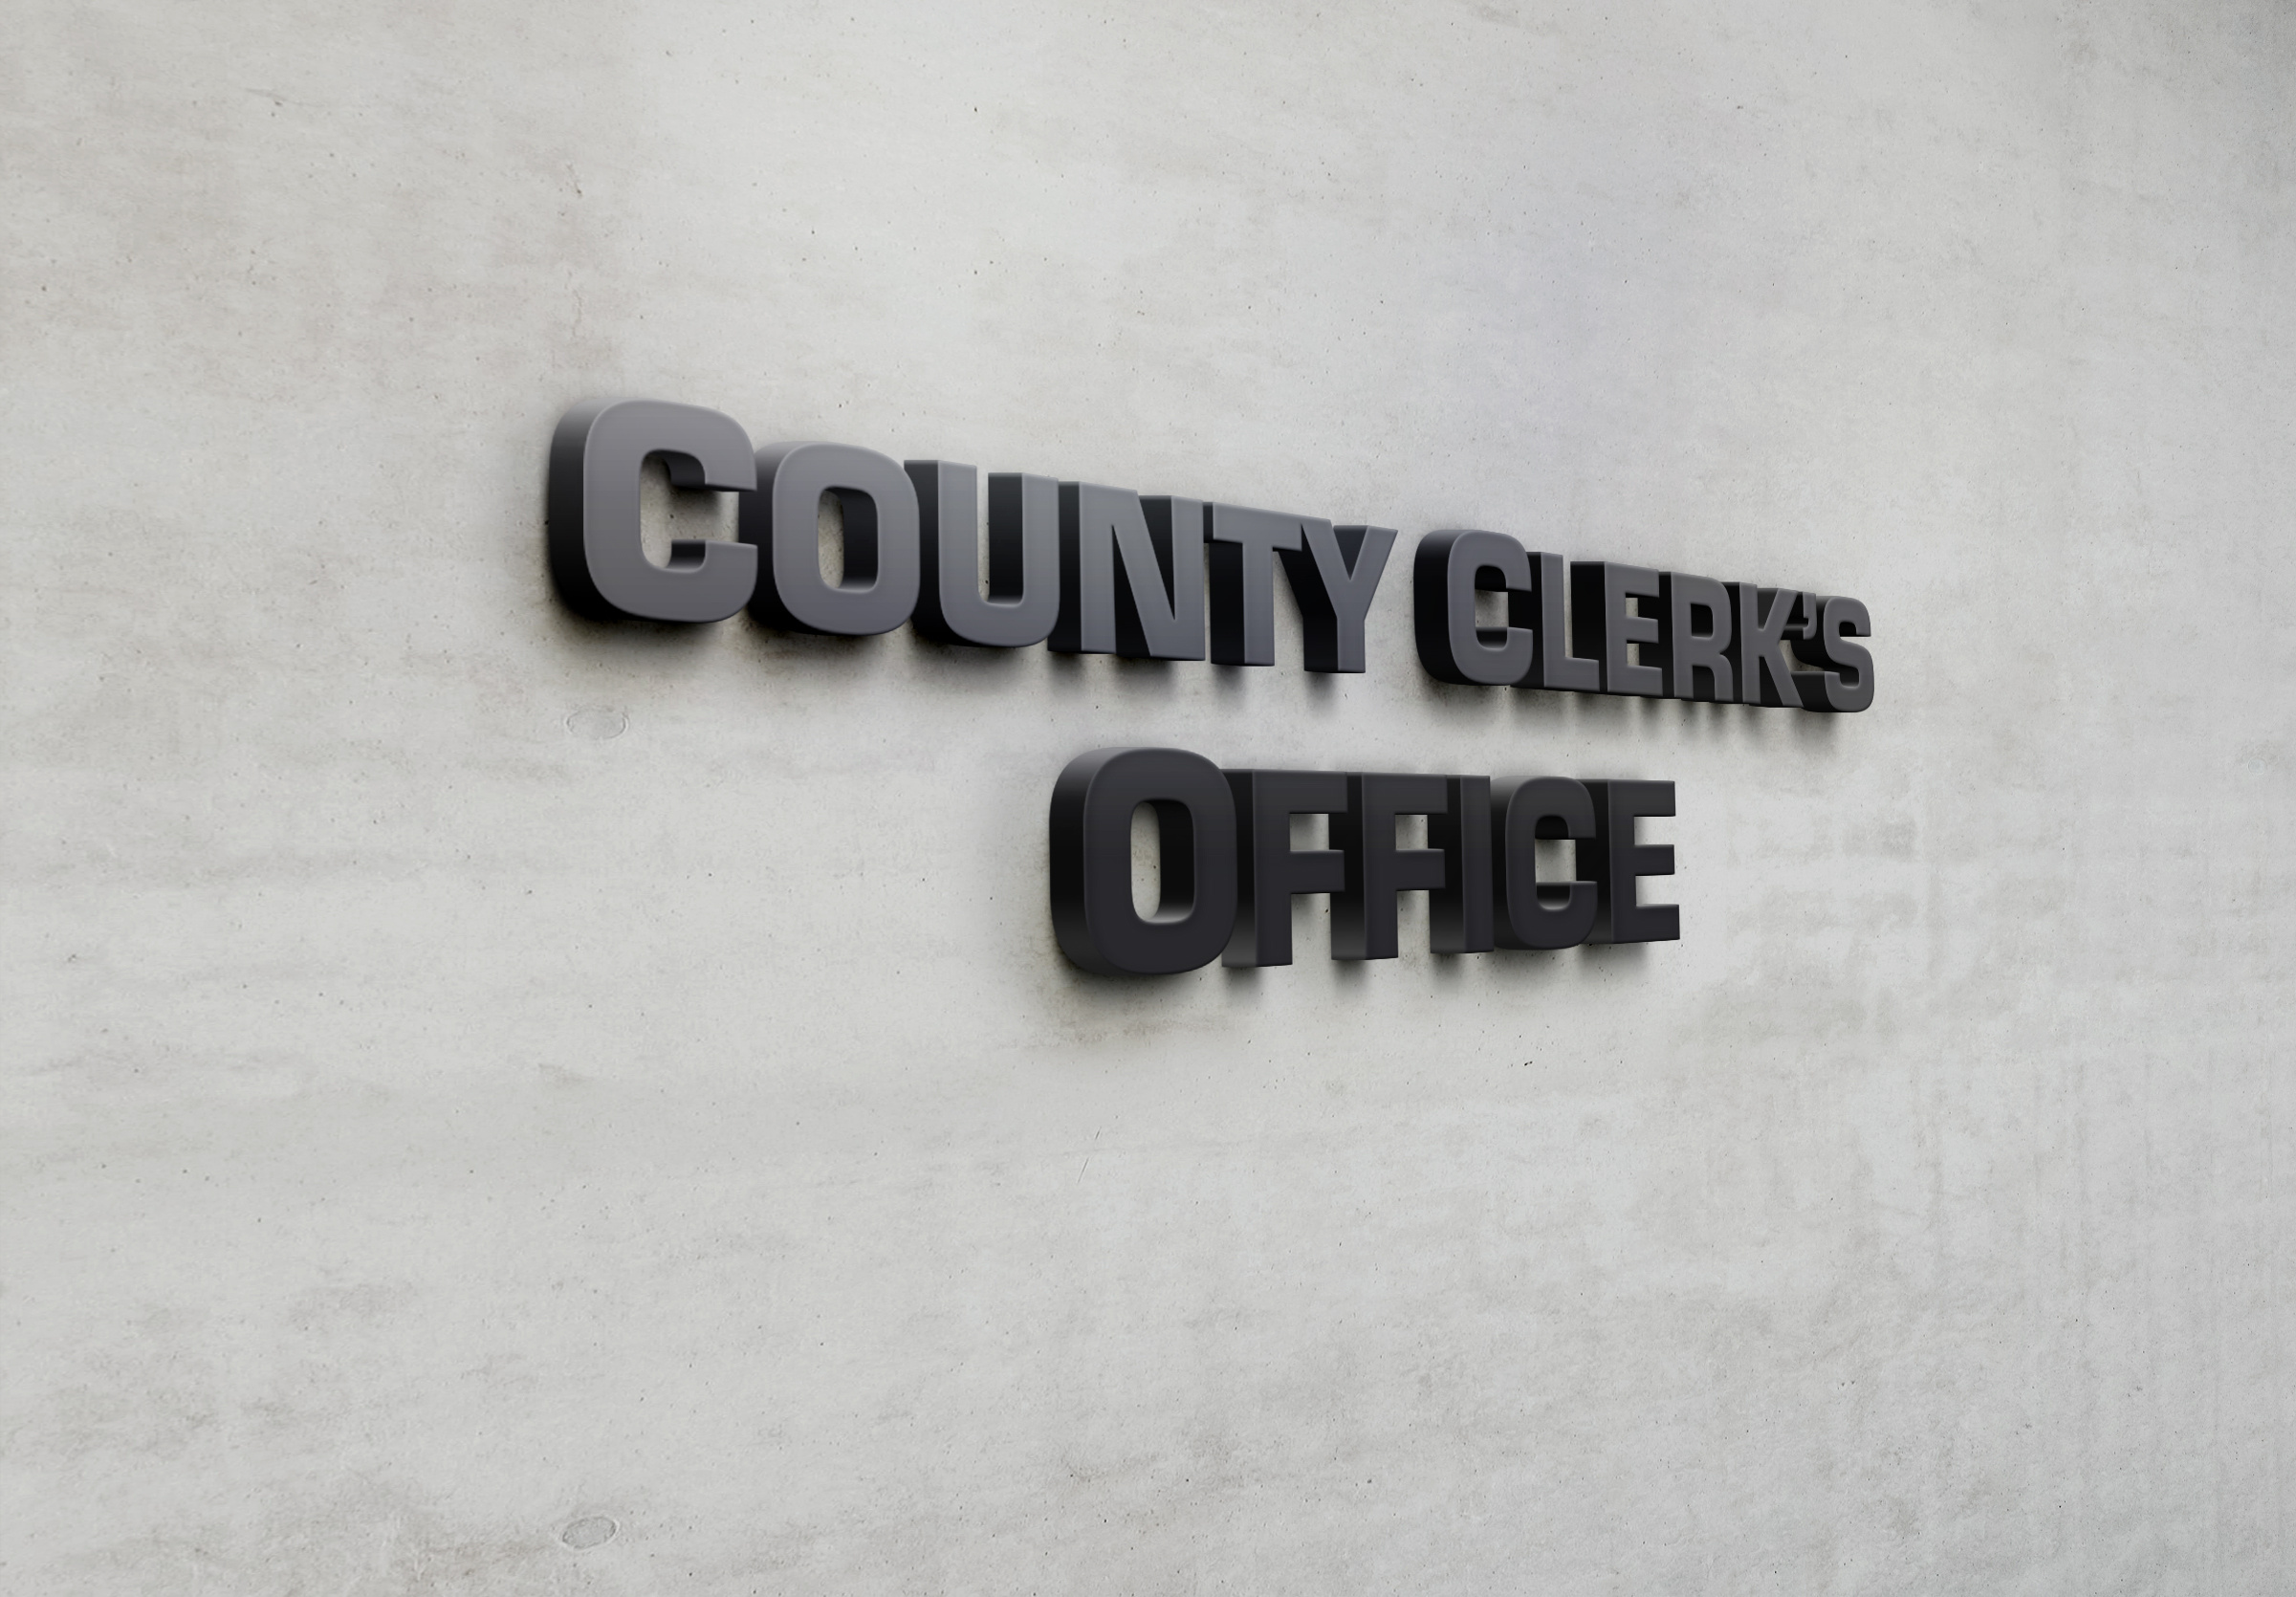 Martin County civil suits and deeds